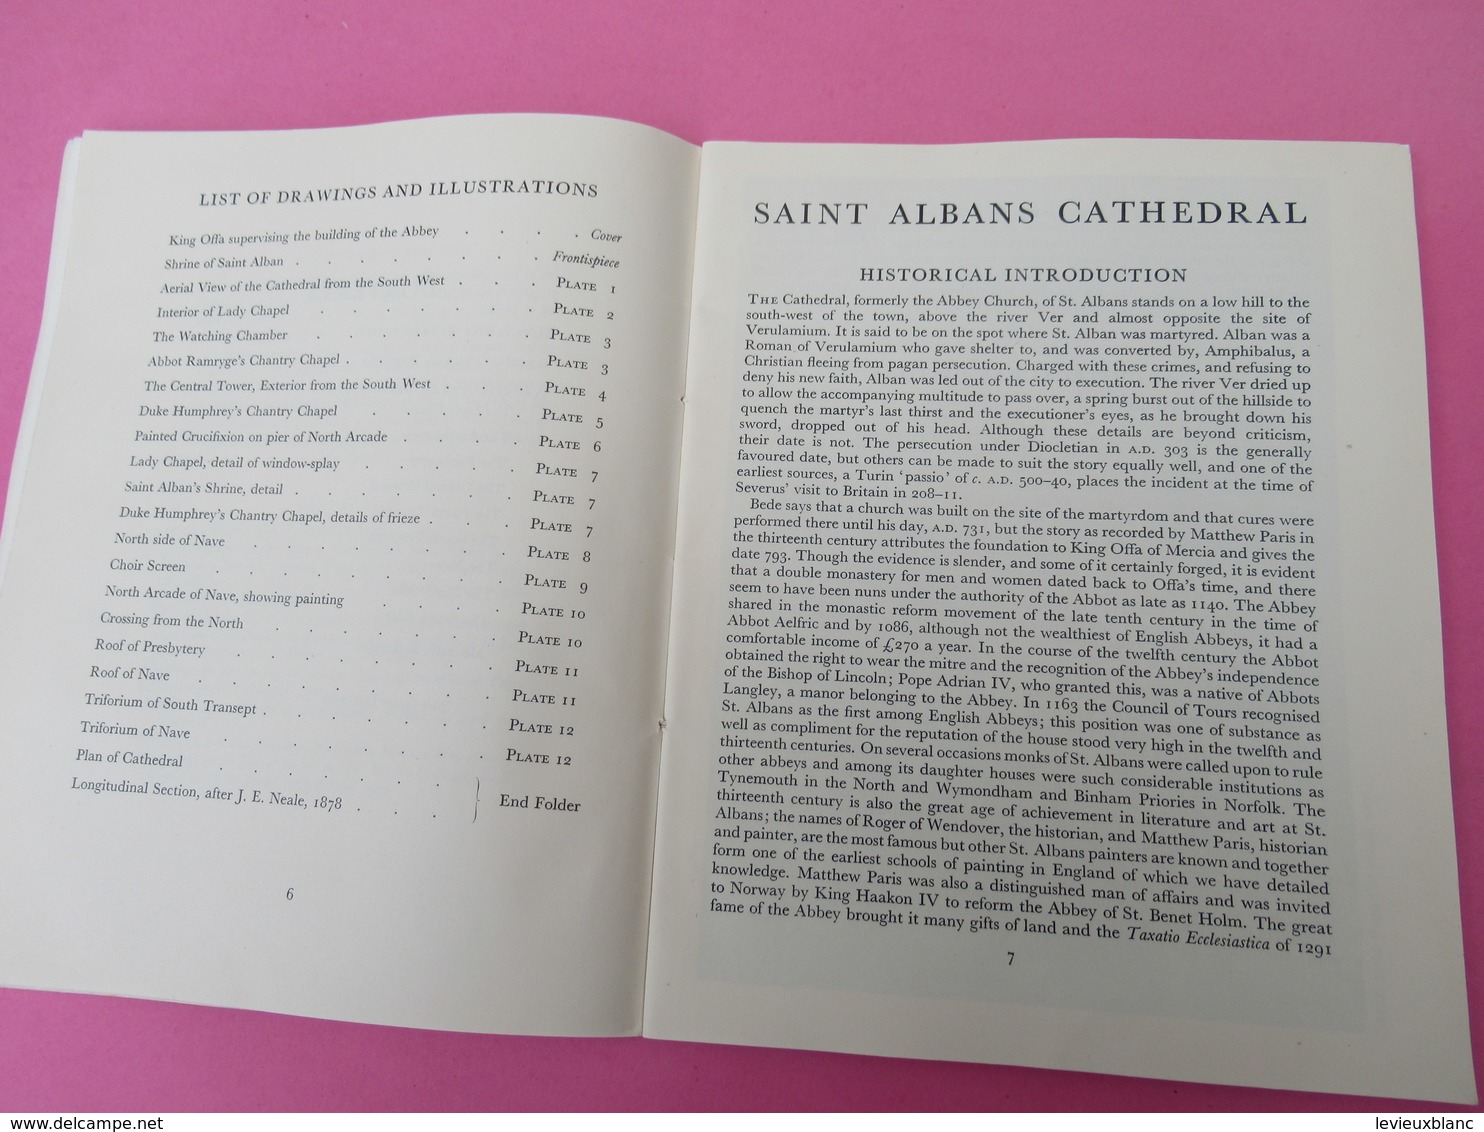 Guide/ANGLETERRE/ A Guide To SAINT ALBANS CATHEDRAL/London Her Majesty's Stationery Office/1956     PGC339 - Tourism Brochures